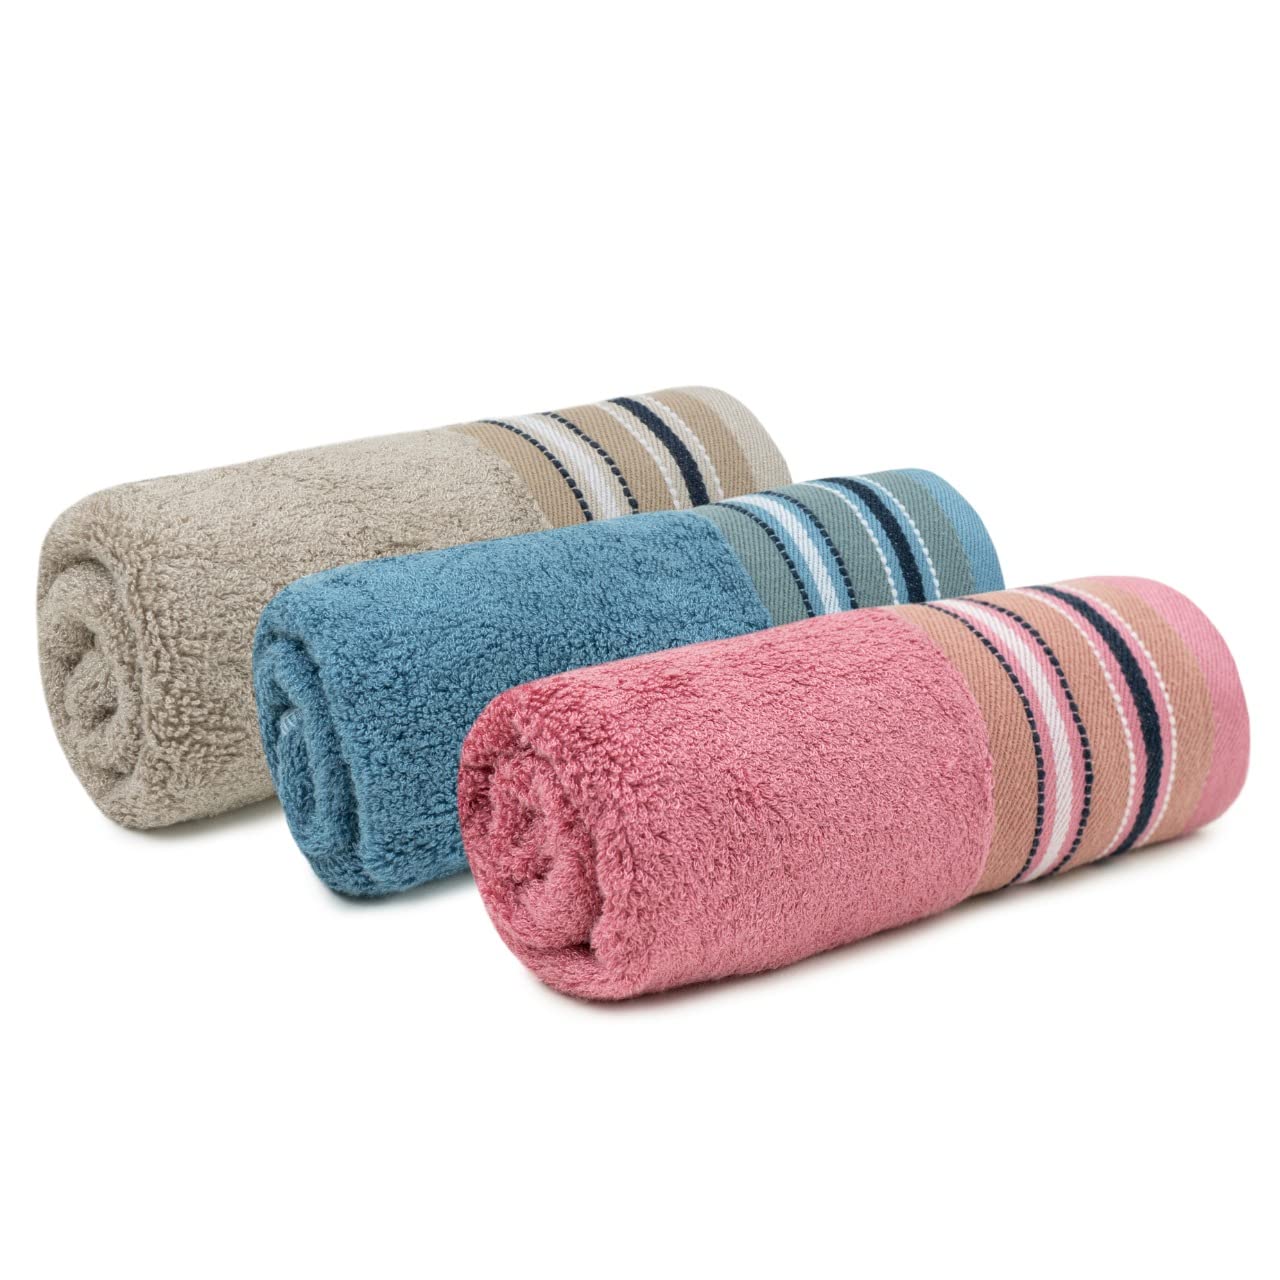 Mush Designer Bamboo Face Towel |Ultra Soft, Absorbent & Quick Dry Towel for Bath, Beach, Pool, Travel, Spa and Yoga (Face Towels, Assorted3)